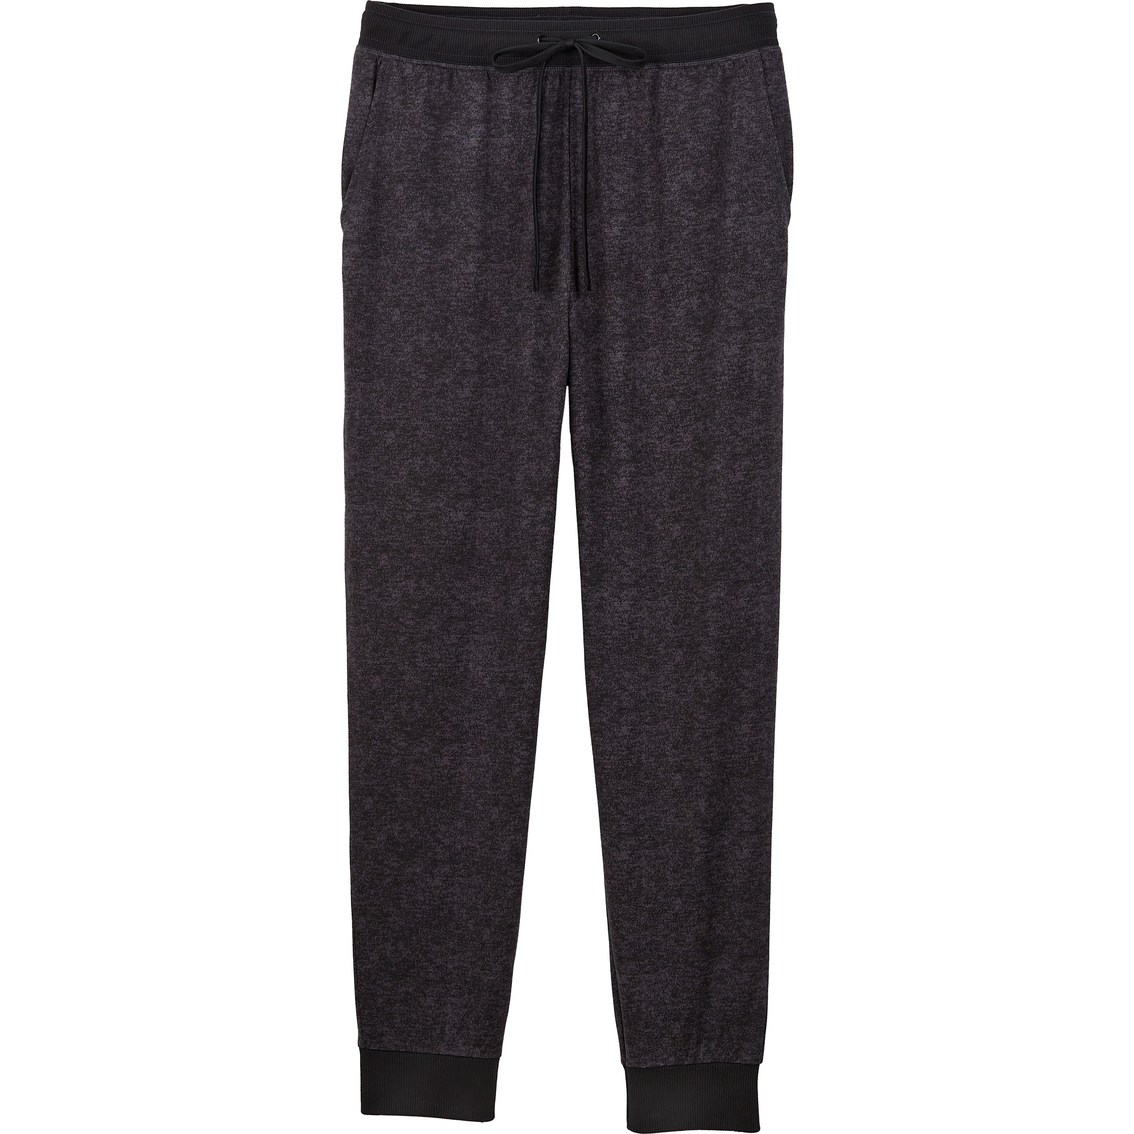 Jaclyn Ande Sleep Joggers | Pajamas & Robes | Clothing & Accessories ...